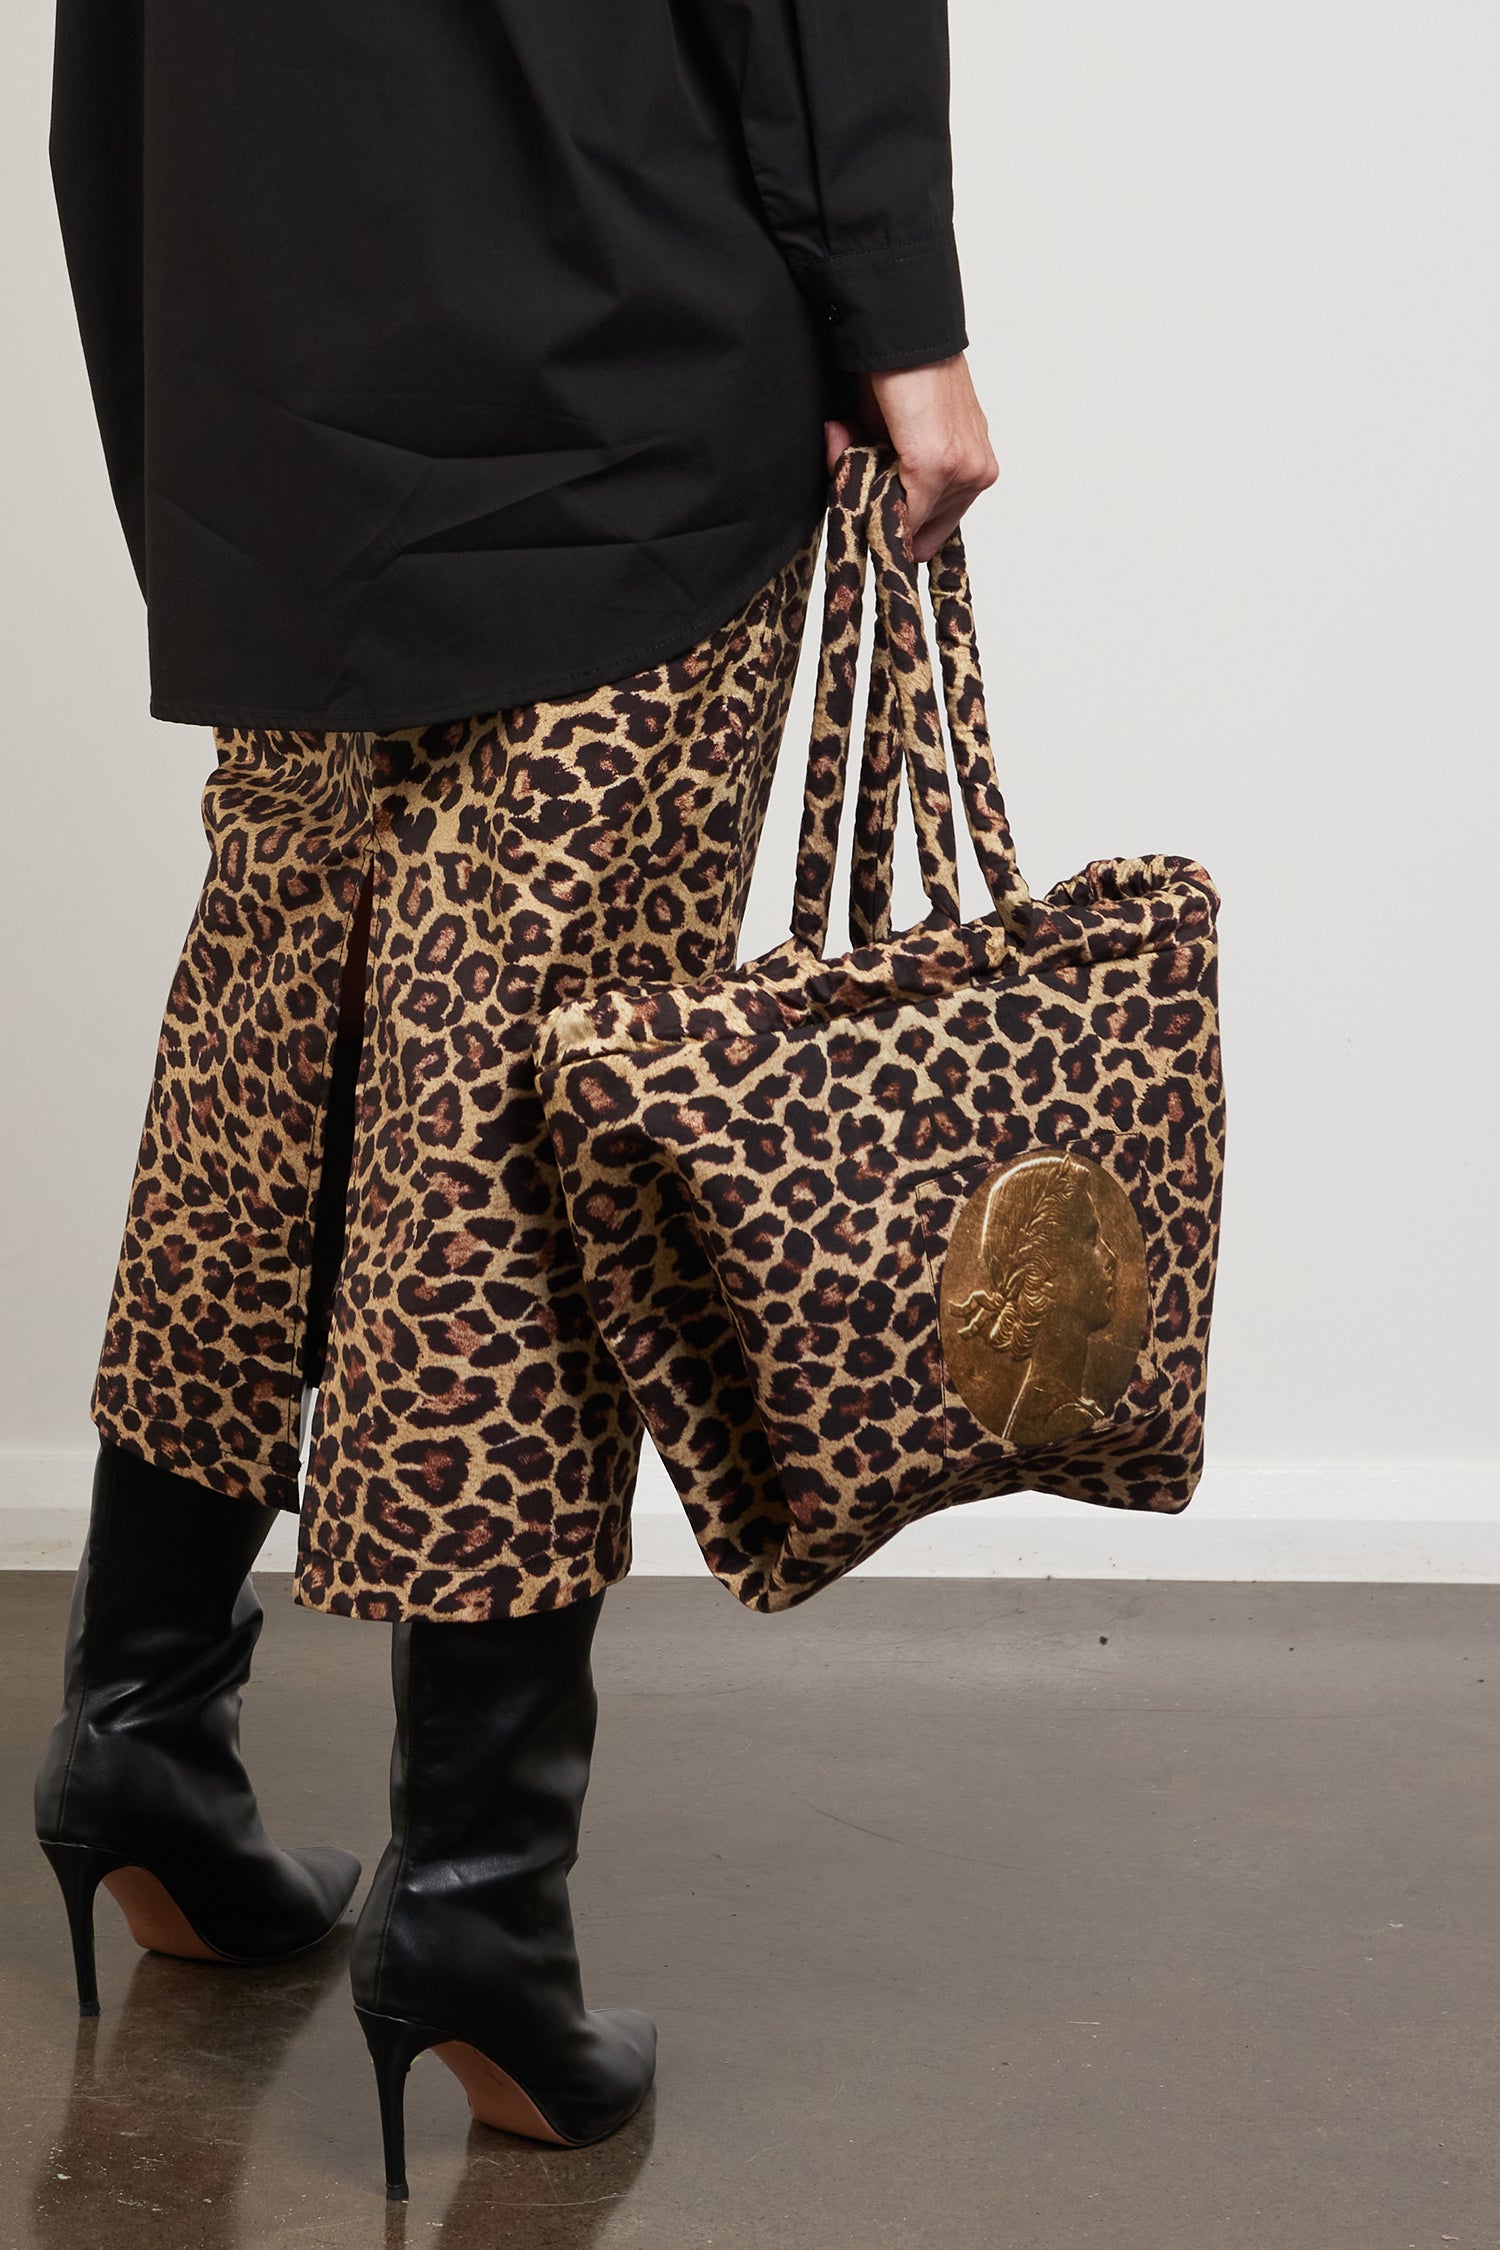 Cow Print Purse And Bag - Cow Print Clothing